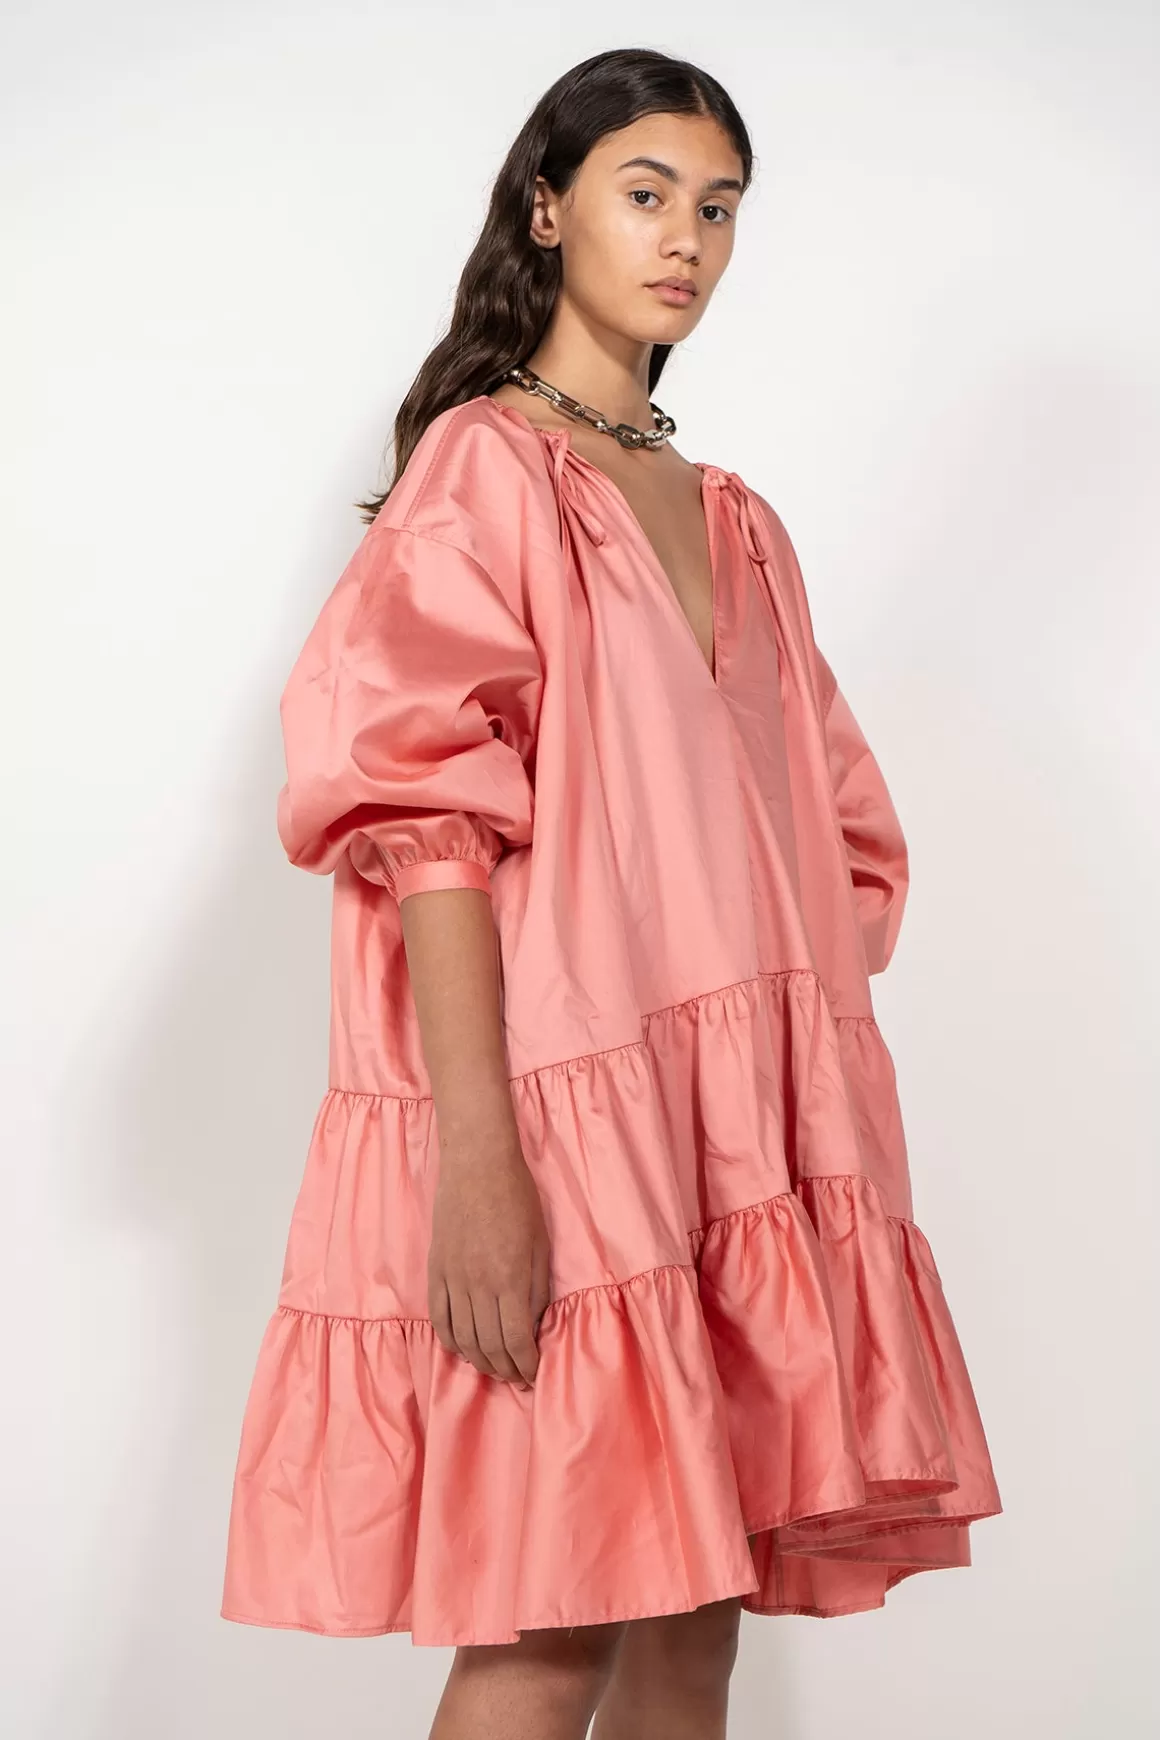 Cheap OVERSIZED TIERED GATHERED DRESS IN Women DRESSES